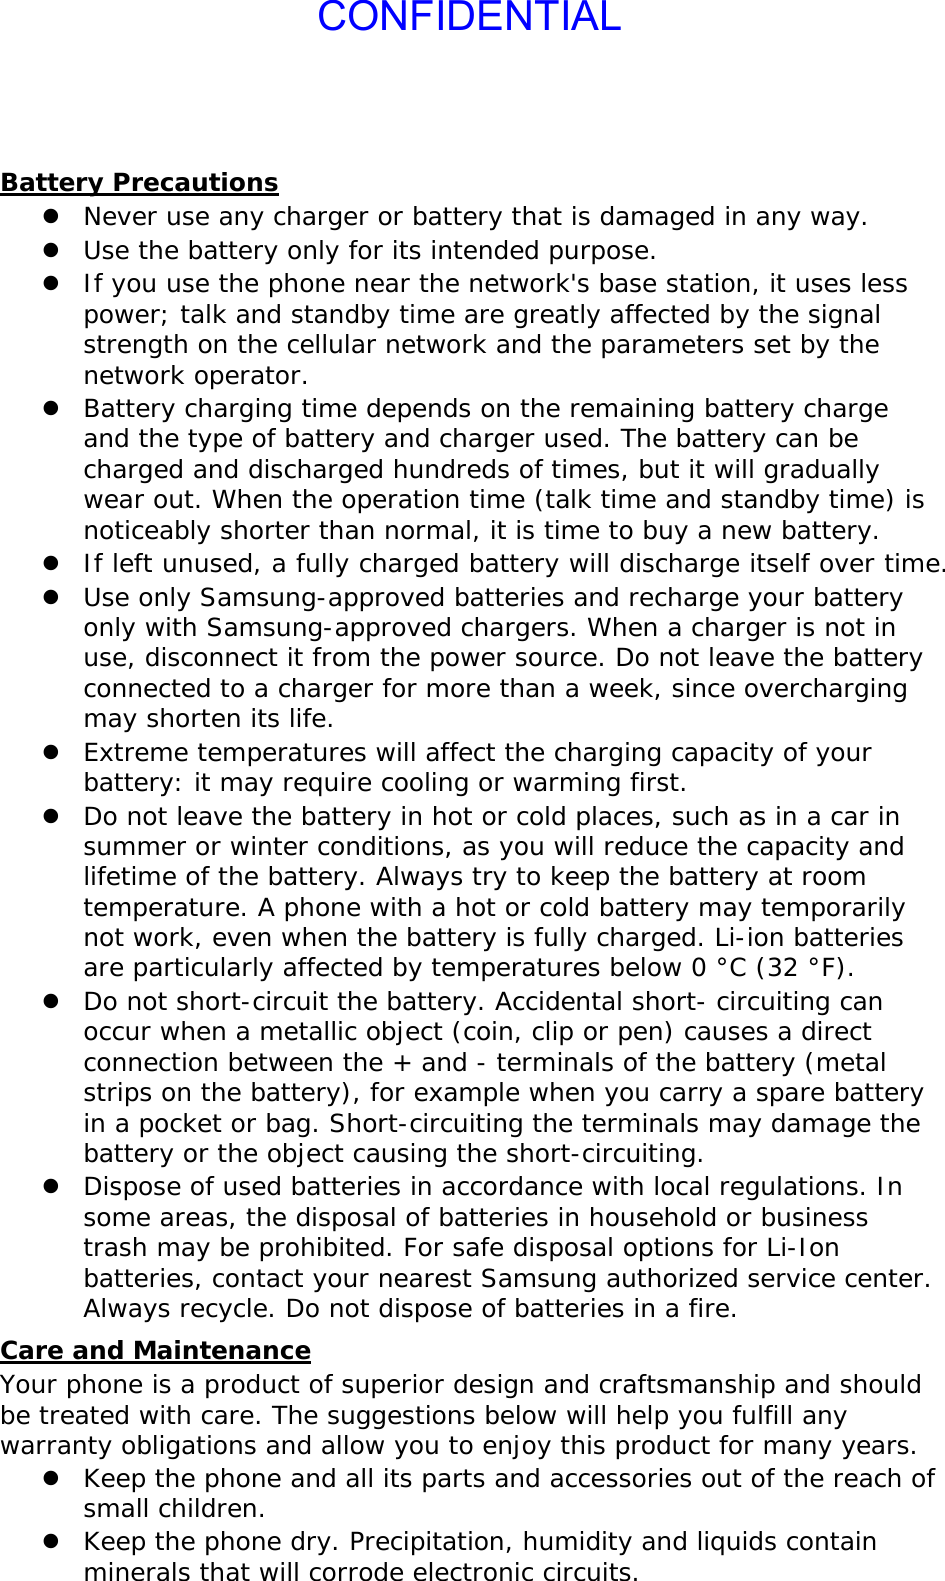 CONFIDENTIALBattery Precautions z Never use any charger or battery that is damaged in any way. z Use the battery only for its intended purpose. z If you use the phone near the network&apos;s base station, it uses less power; talk and standby time are greatly affected by the signal strength on the cellular network and the parameters set by the network operator. z Battery charging time depends on the remaining battery charge and the type of battery and charger used. The battery can be charged and discharged hundreds of times, but it will gradually wear out. When the operation time (talk time and standby time) is noticeably shorter than normal, it is time to buy a new battery. z If left unused, a fully charged battery will discharge itself over time. z Use only Samsung-approved batteries and recharge your battery only with Samsung-approved chargers. When a charger is not in use, disconnect it from the power source. Do not leave the battery connected to a charger for more than a week, since overcharging may shorten its life. z Extreme temperatures will affect the charging capacity of your battery: it may require cooling or warming first. z Do not leave the battery in hot or cold places, such as in a car in summer or winter conditions, as you will reduce the capacity and lifetime of the battery. Always try to keep the battery at room temperature. A phone with a hot or cold battery may temporarily not work, even when the battery is fully charged. Li-ion batteries are particularly affected by temperatures below 0 °C (32 °F). z Do not short-circuit the battery. Accidental short- circuiting can occur when a metallic object (coin, clip or pen) causes a direct connection between the + and - terminals of the battery (metal strips on the battery), for example when you carry a spare battery in a pocket or bag. Short-circuiting the terminals may damage the battery or the object causing the short-circuiting. z Dispose of used batteries in accordance with local regulations. In some areas, the disposal of batteries in household or business trash may be prohibited. For safe disposal options for Li-Ion batteries, contact your nearest Samsung authorized service center. Always recycle. Do not dispose of batteries in a fire. Care and Maintenance Your phone is a product of superior design and craftsmanship and should be treated with care. The suggestions below will help you fulfill any warranty obligations and allow you to enjoy this product for many years. z Keep the phone and all its parts and accessories out of the reach of small children. z Keep the phone dry. Precipitation, humidity and liquids contain minerals that will corrode electronic circuits. 